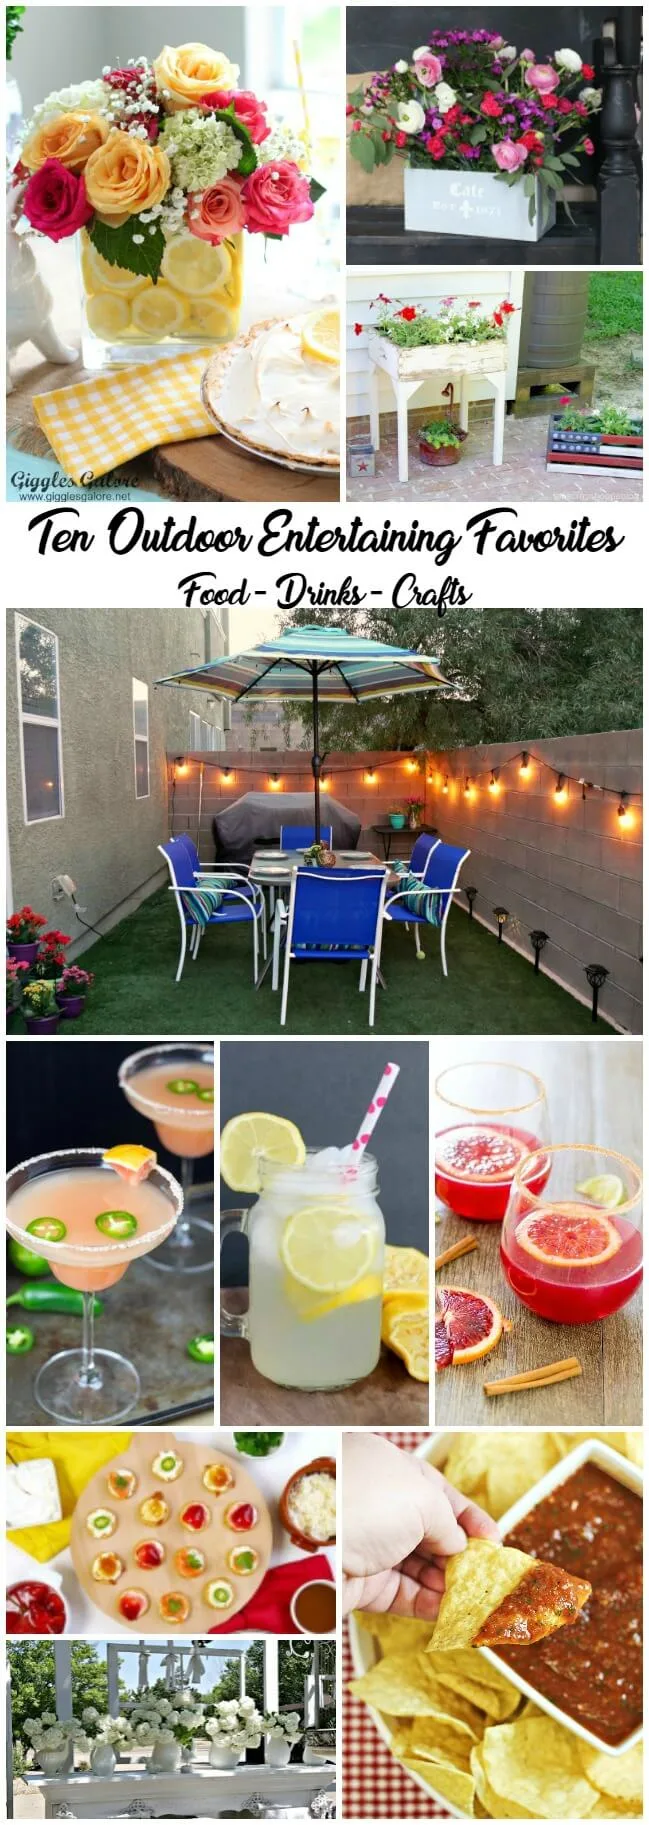 10 Outdoor Entertaining Favorites including food, drinks and crafts to get you backyard party ready!